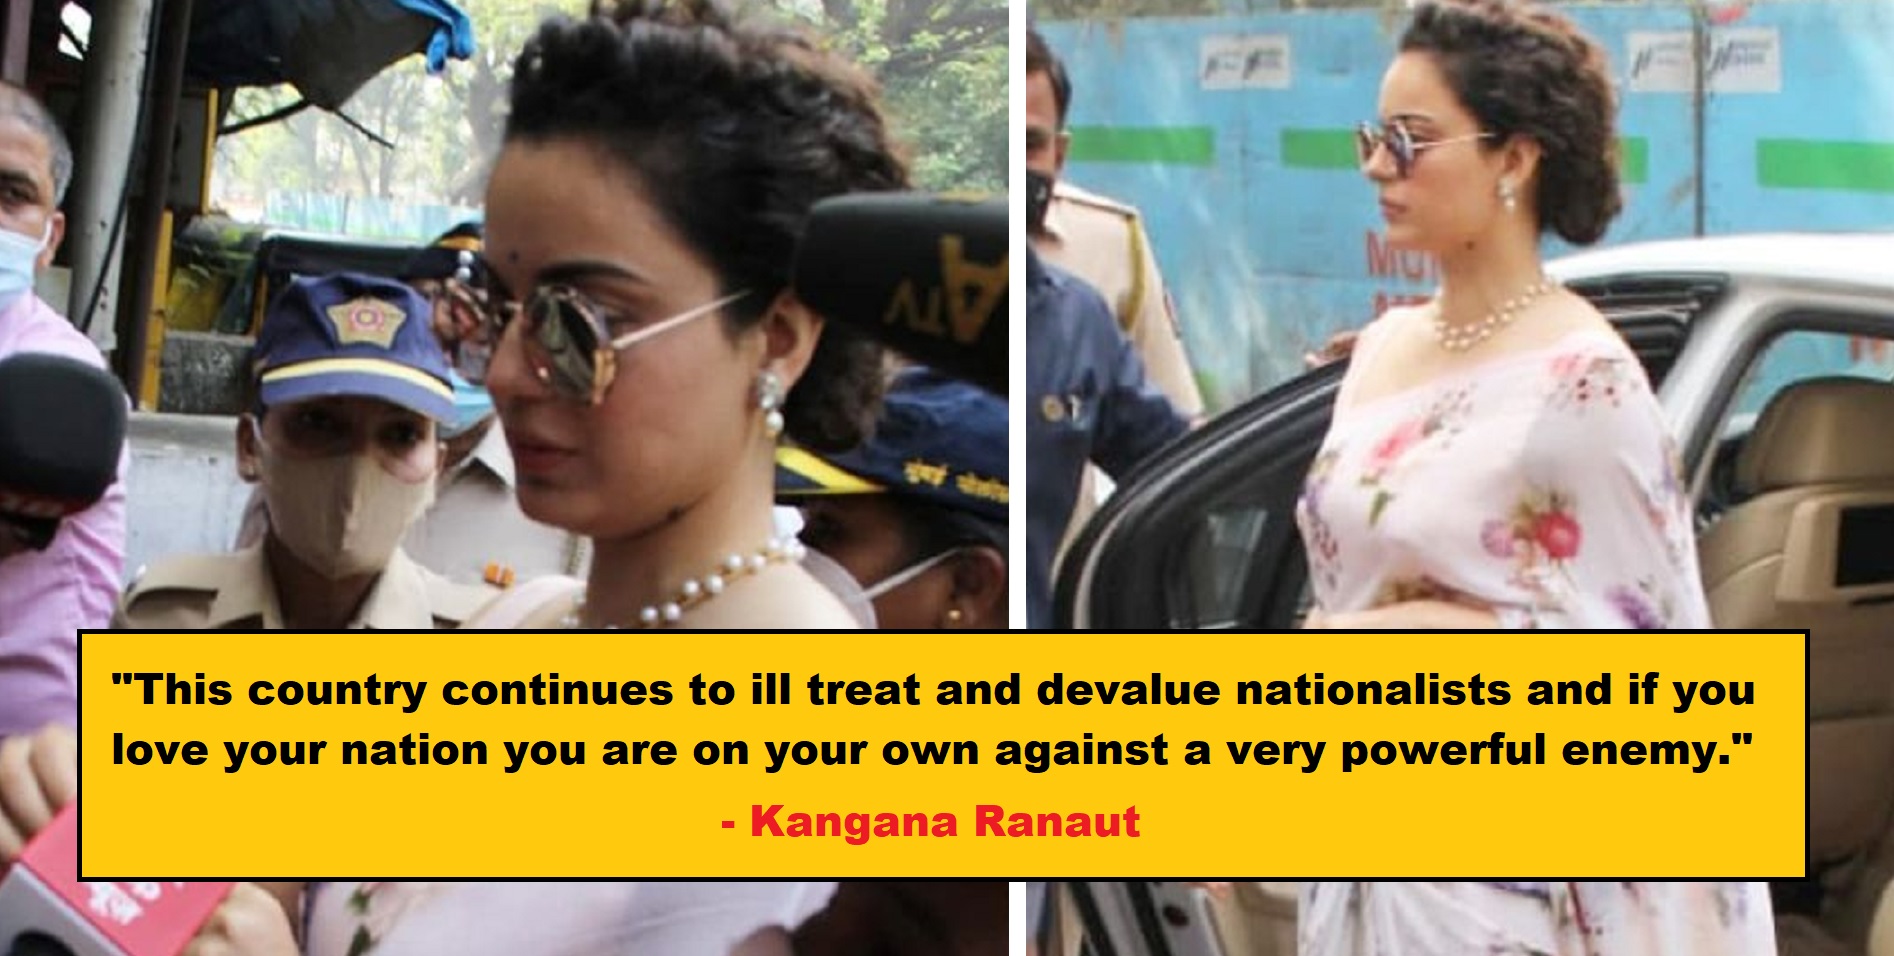 Kangana Ranaut Appears At Khar Police Station, Says ‘This country continues to ill treat nationalists’